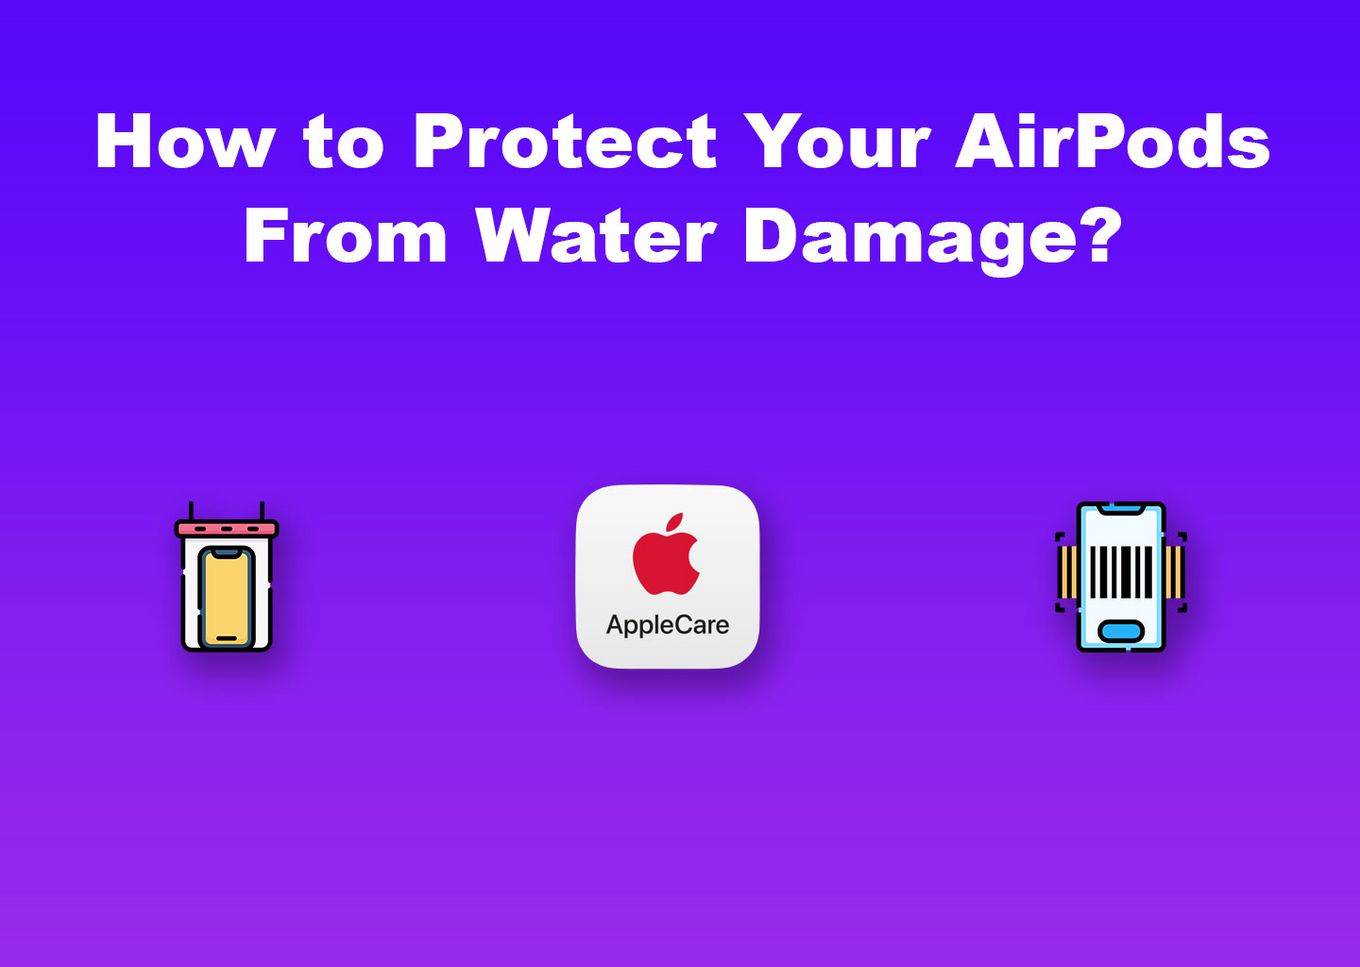 How to Protect AirPods From Water Damage